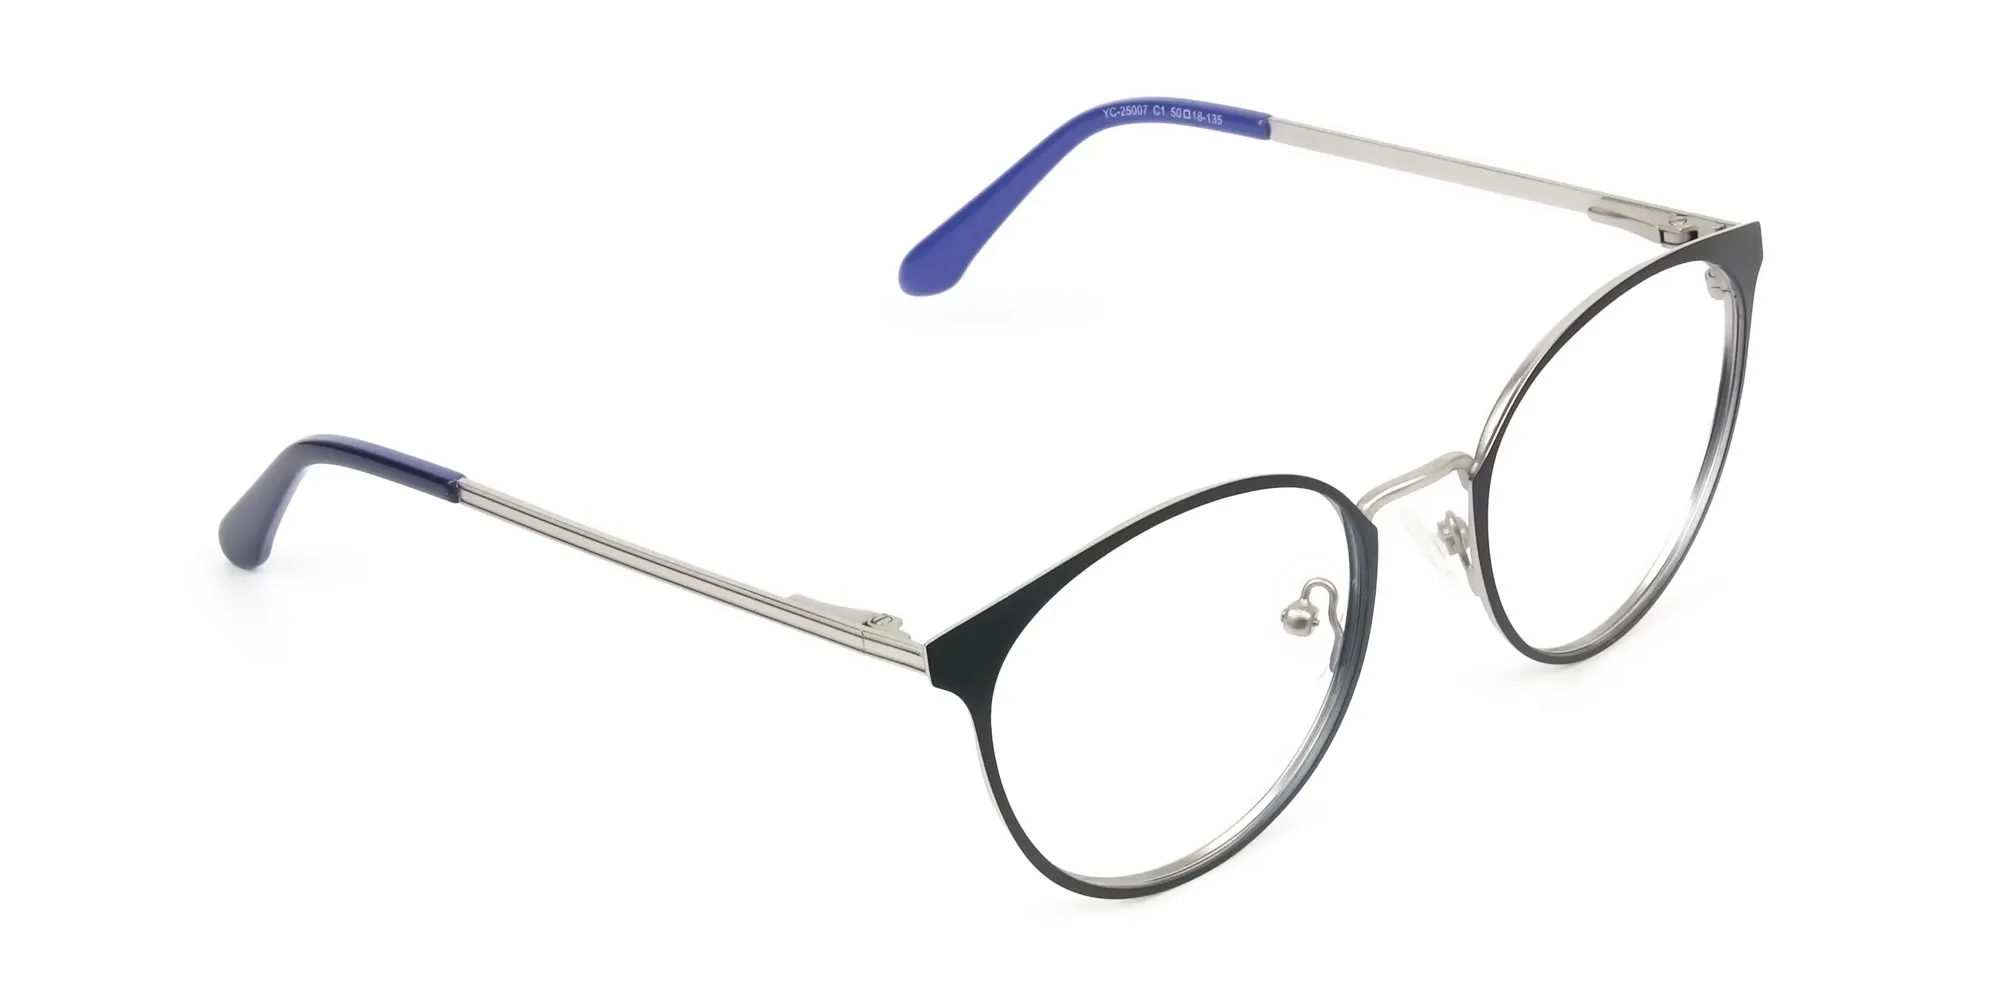 Navy Blue and Silver Round Glasses Frames Men Women  - 2